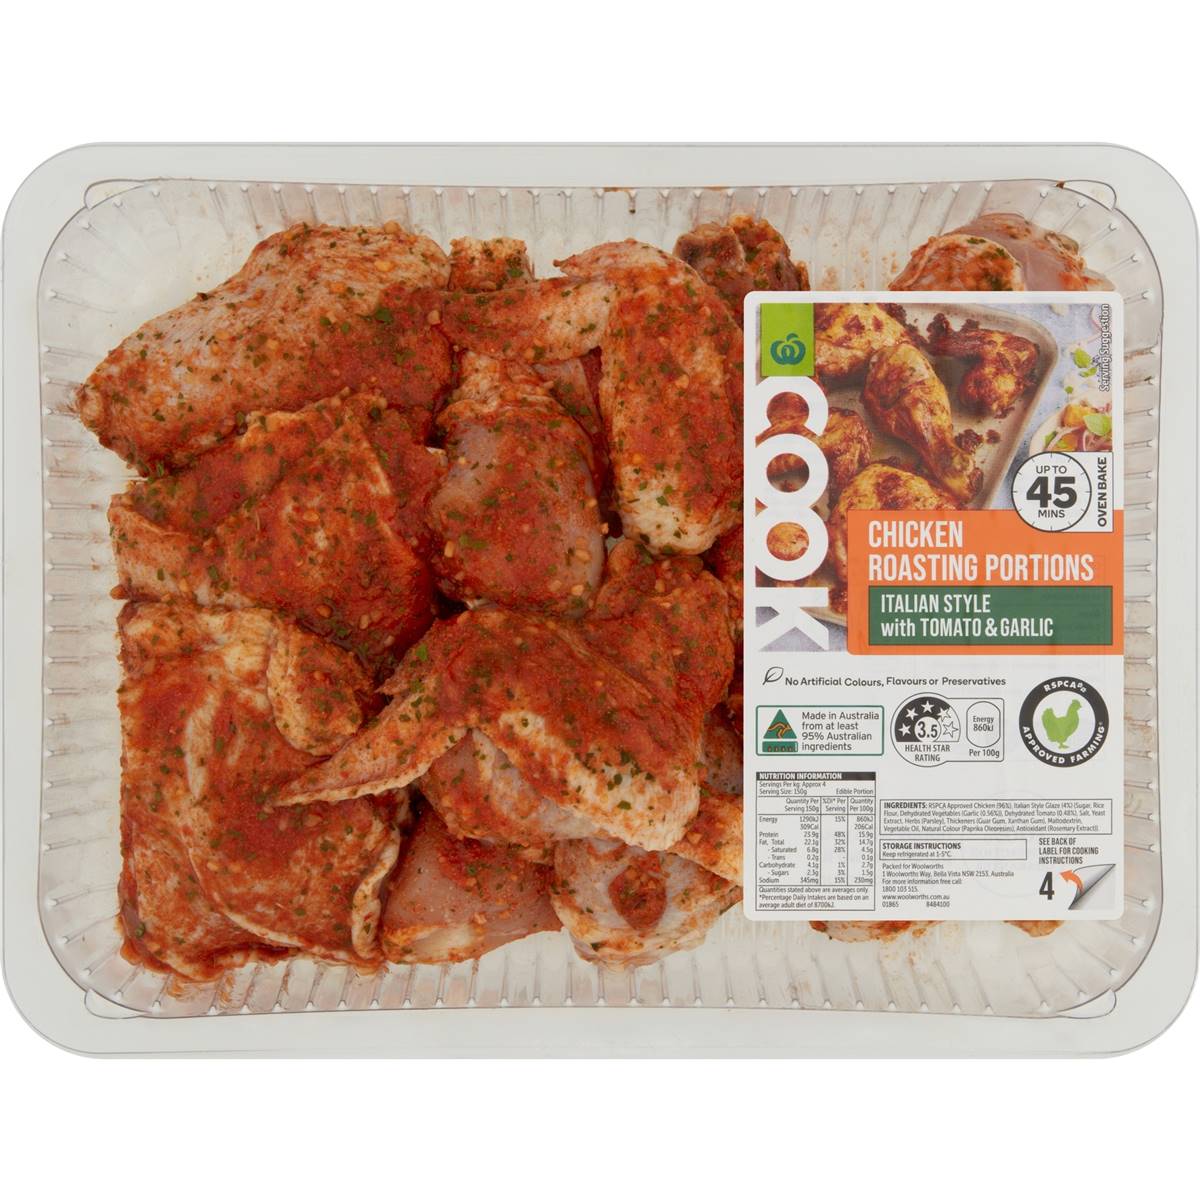 Calories in Woolworths Cook Chicken Roasting Portions Italian Style